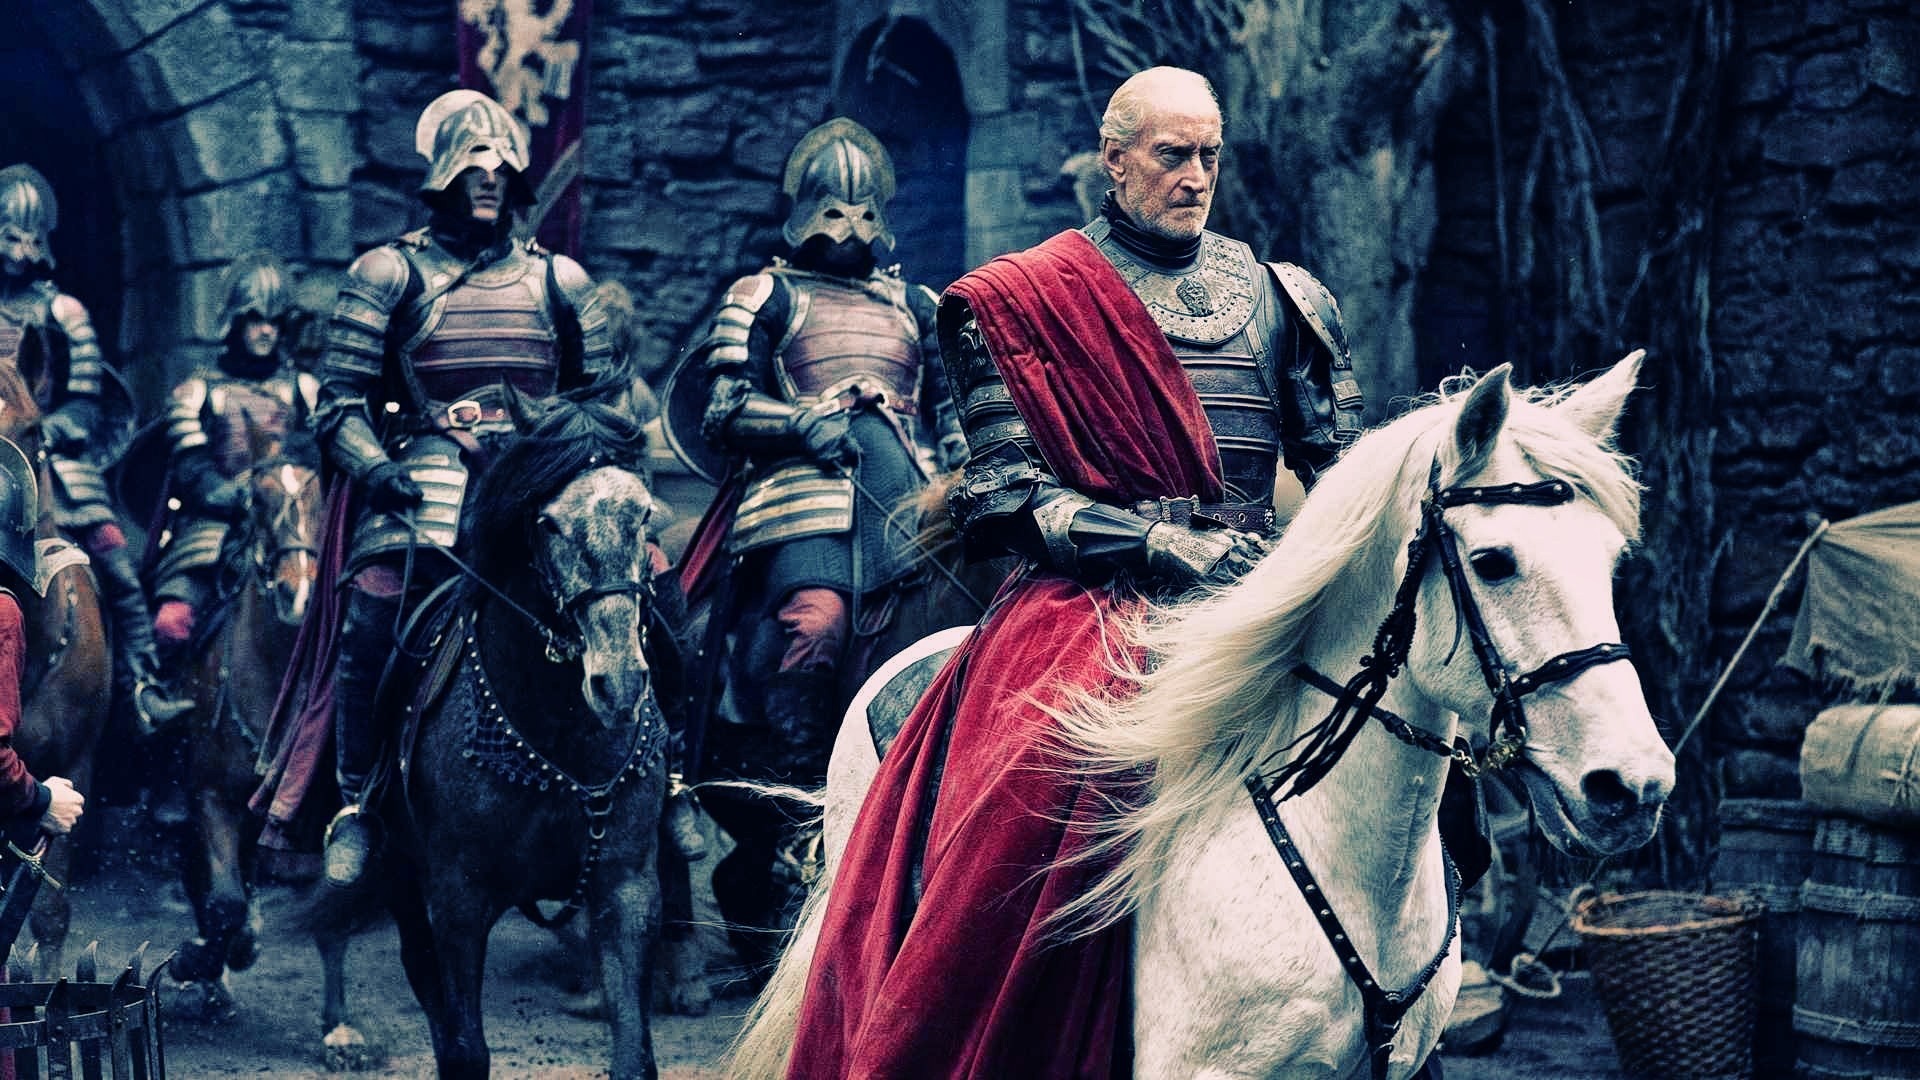 Charles Dance, Movies, Game of Thrones, TV shows, 1920x1080 Full HD Desktop